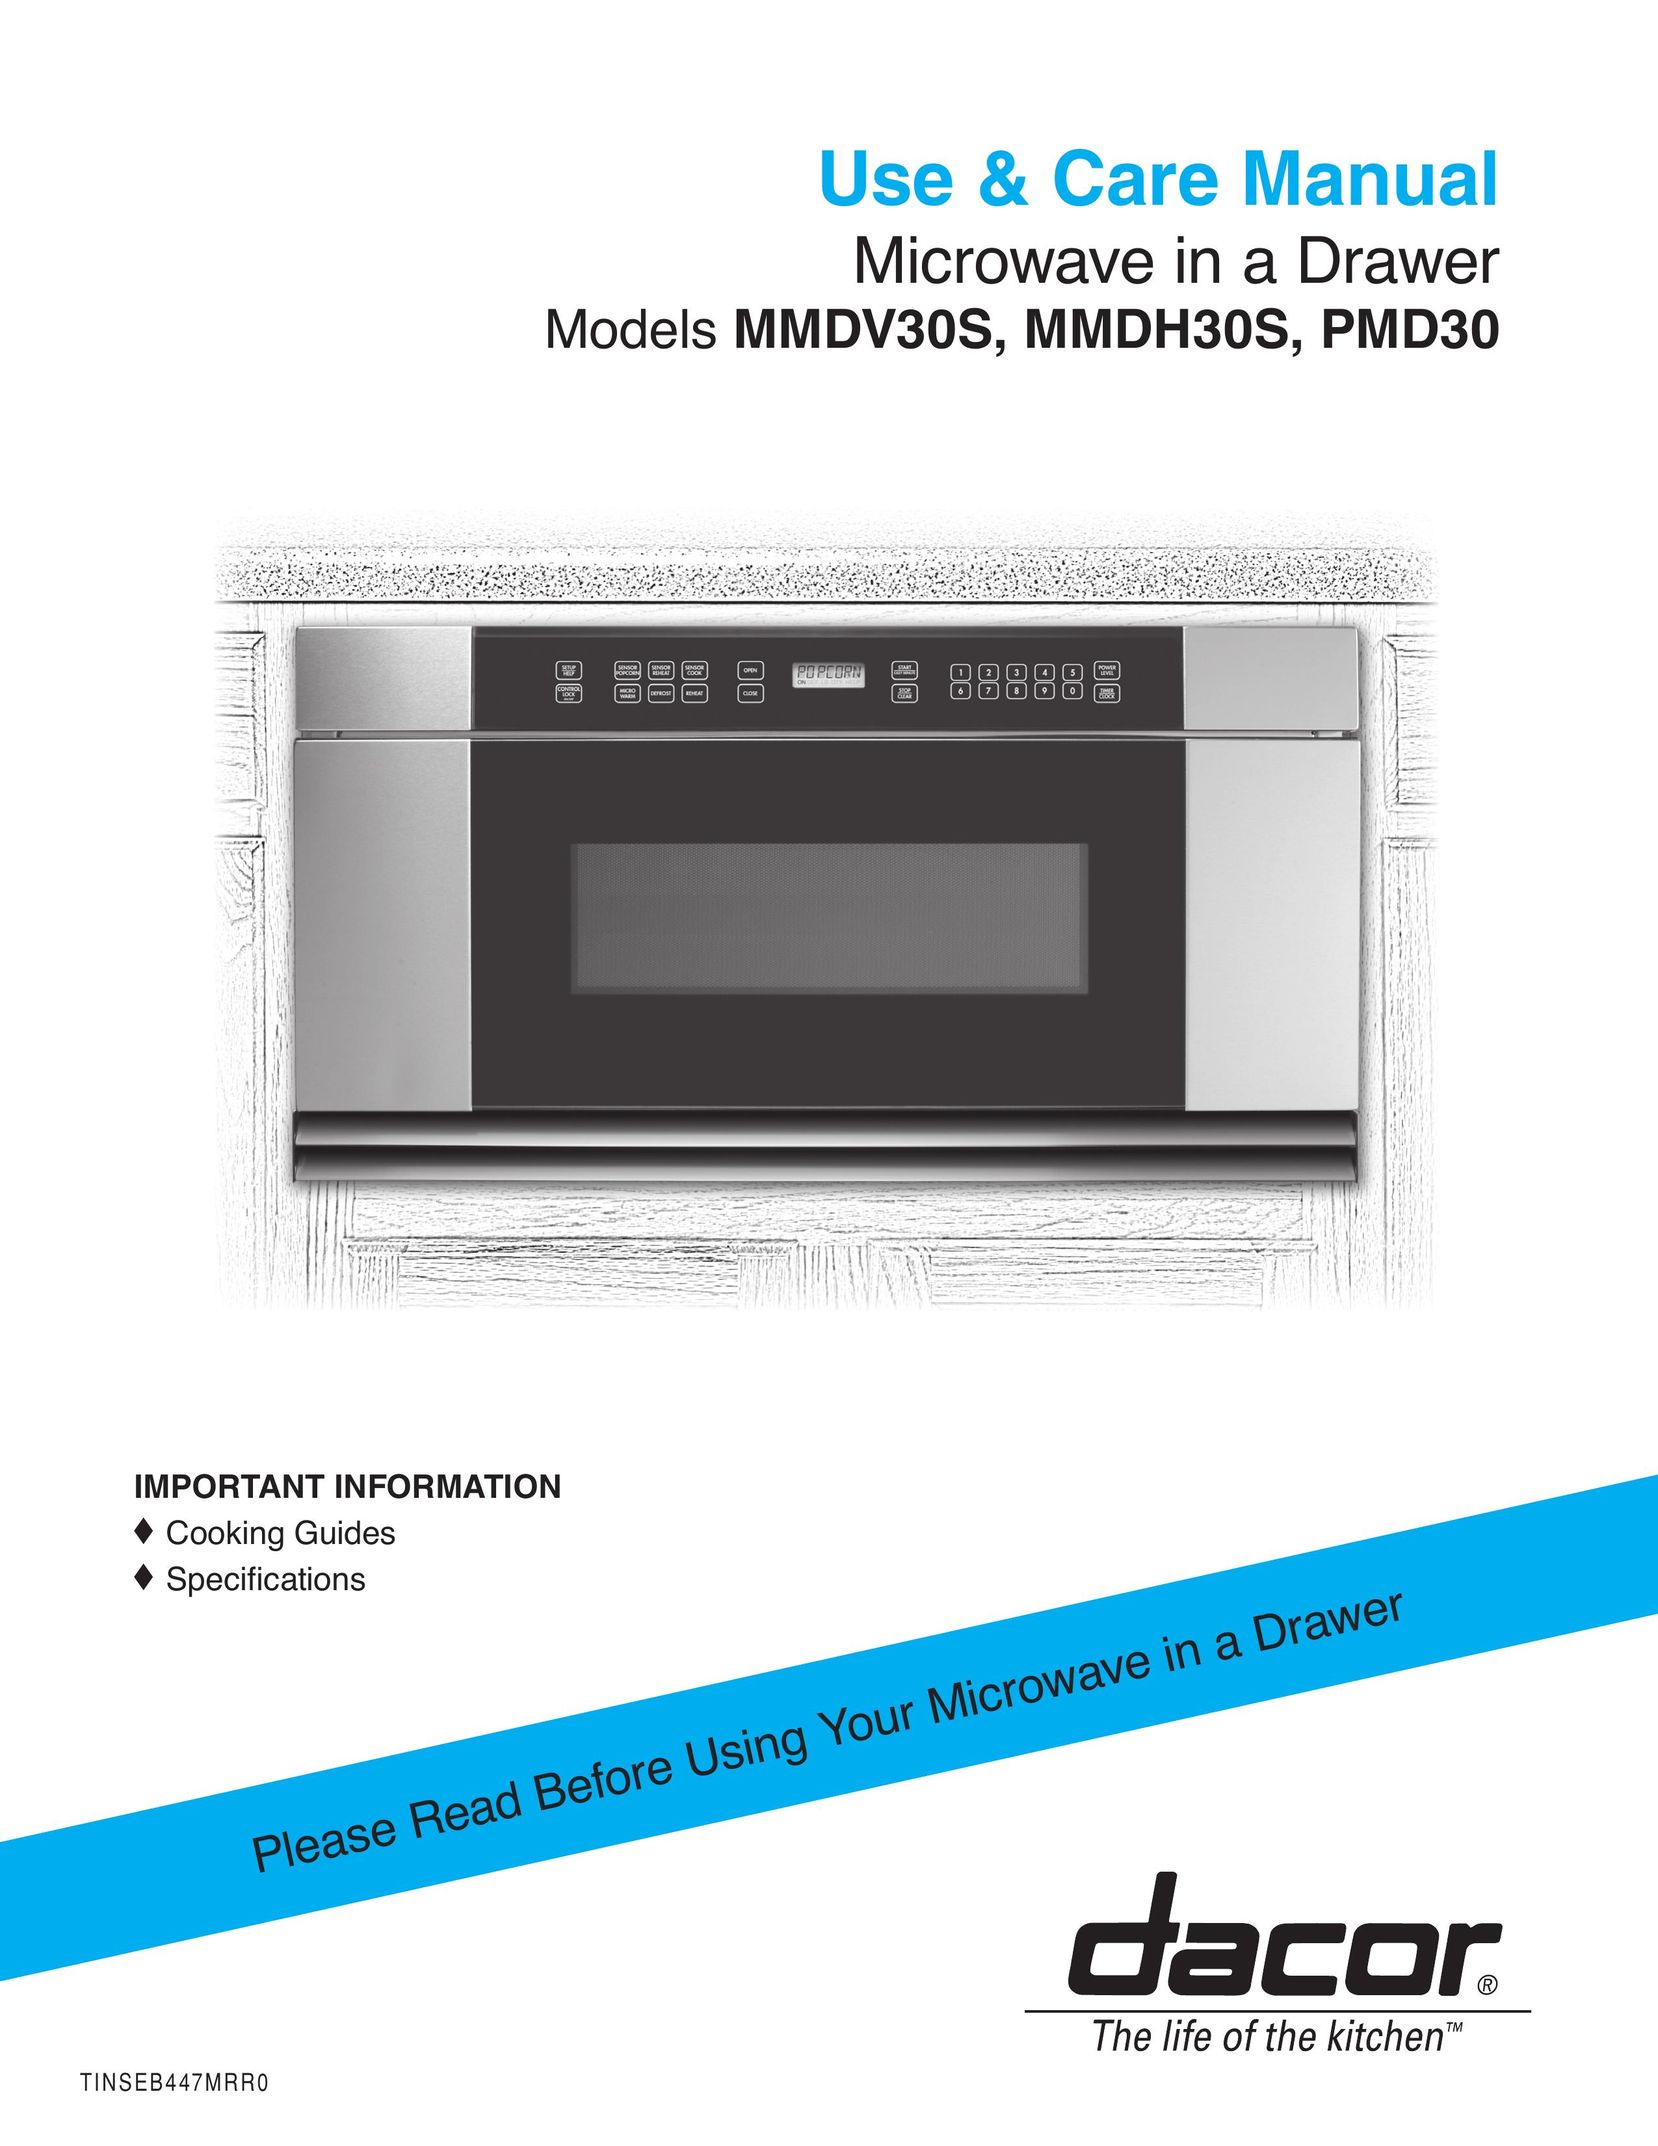 Dacor MMDH30S Microwave Oven User Manual